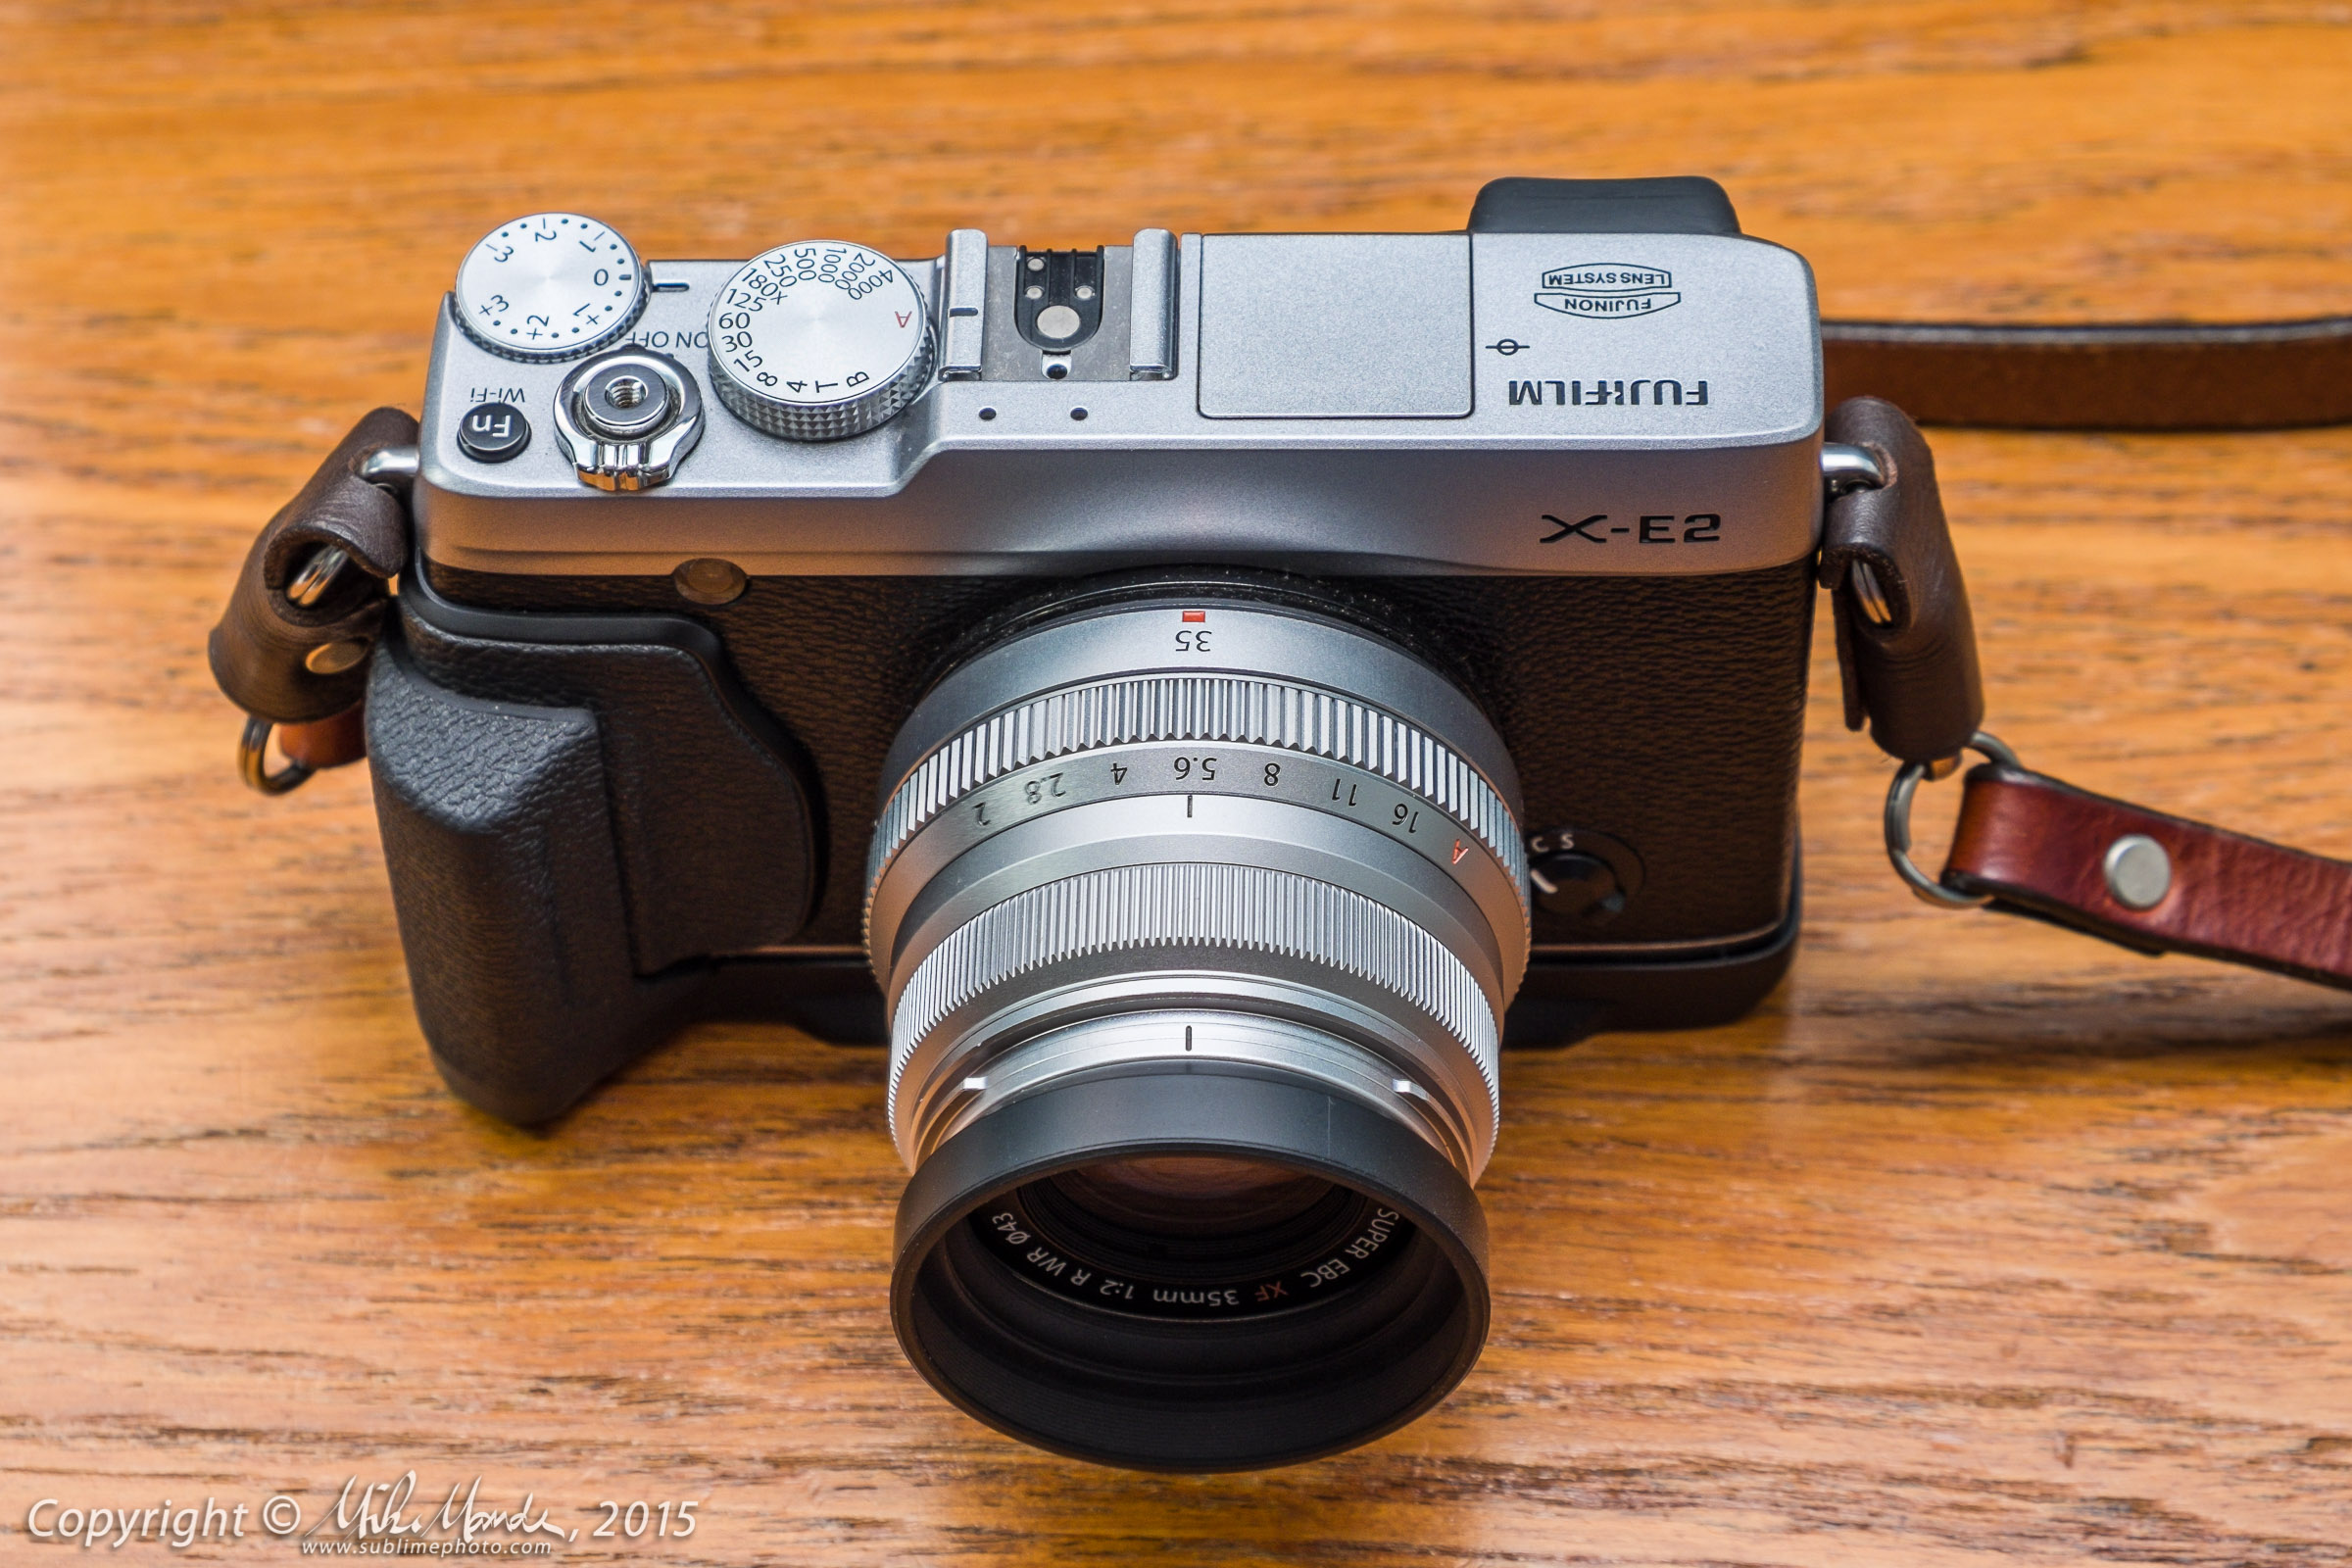 Mike Mander's Photo & Imaging Blog: Tested! Fujinon XF 35mm f/2R WR